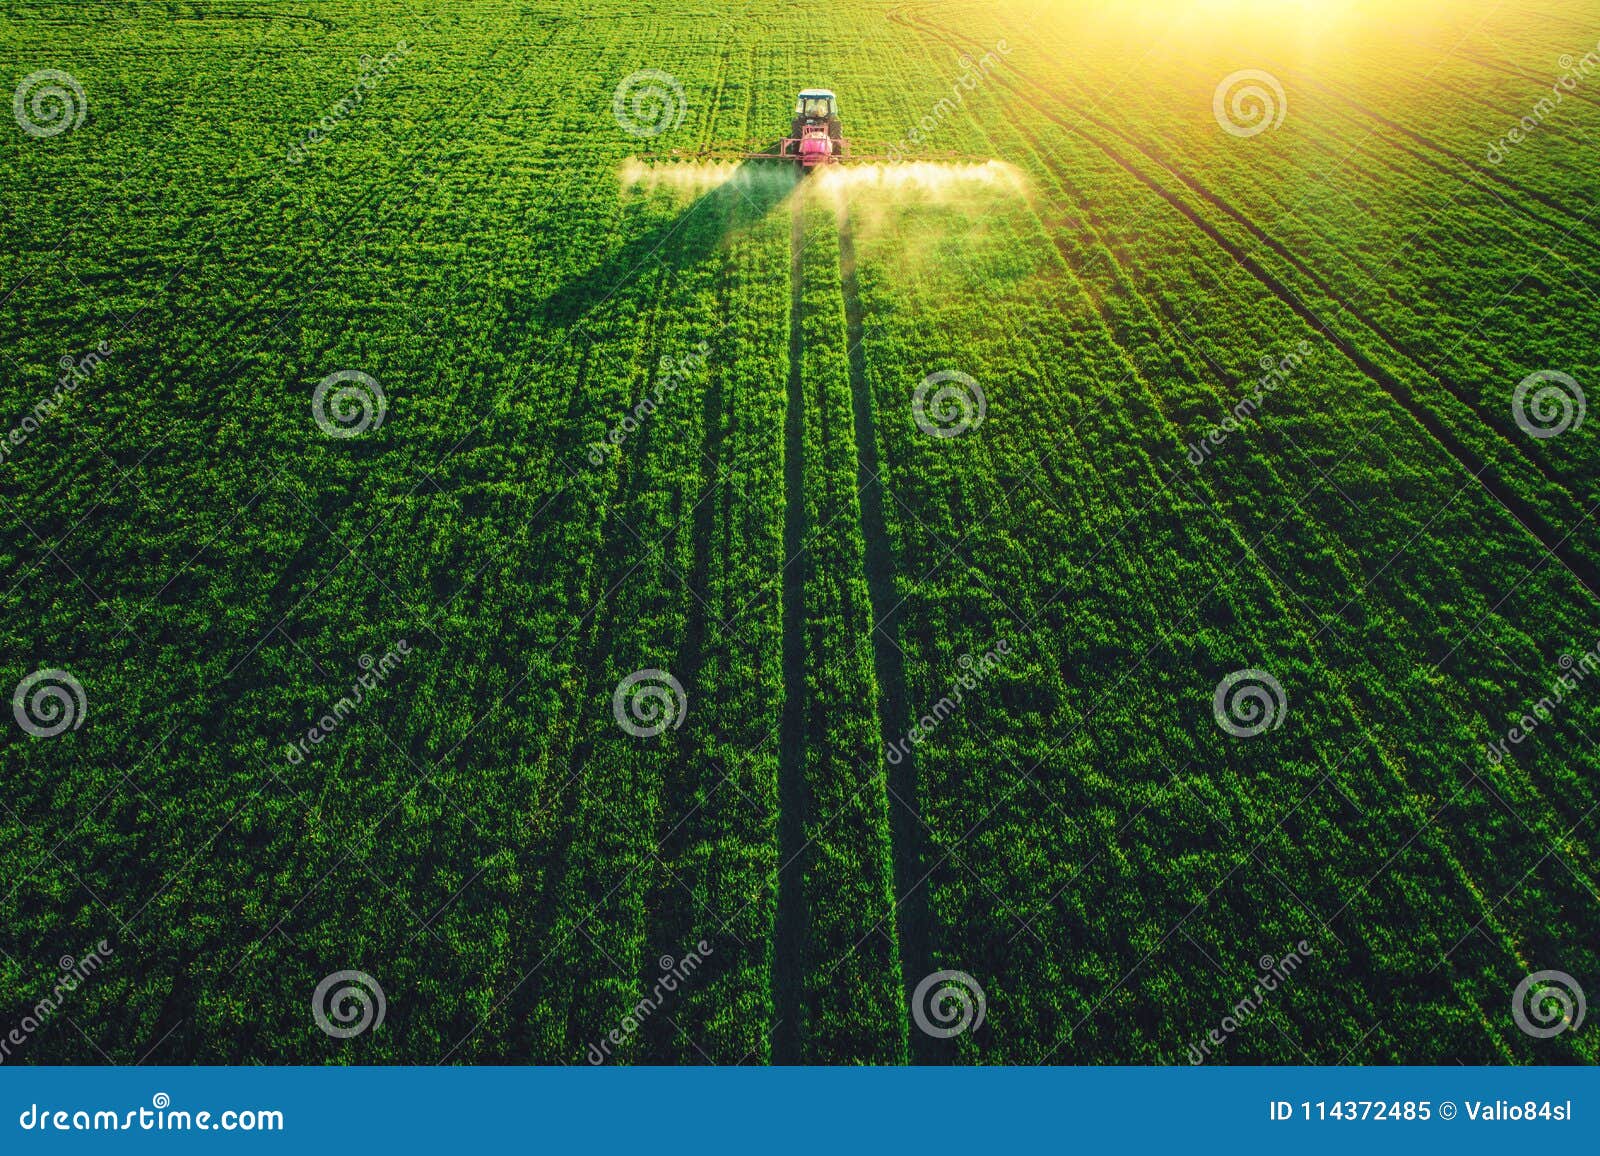 aerial view of farming tractor plowing and spraying on field